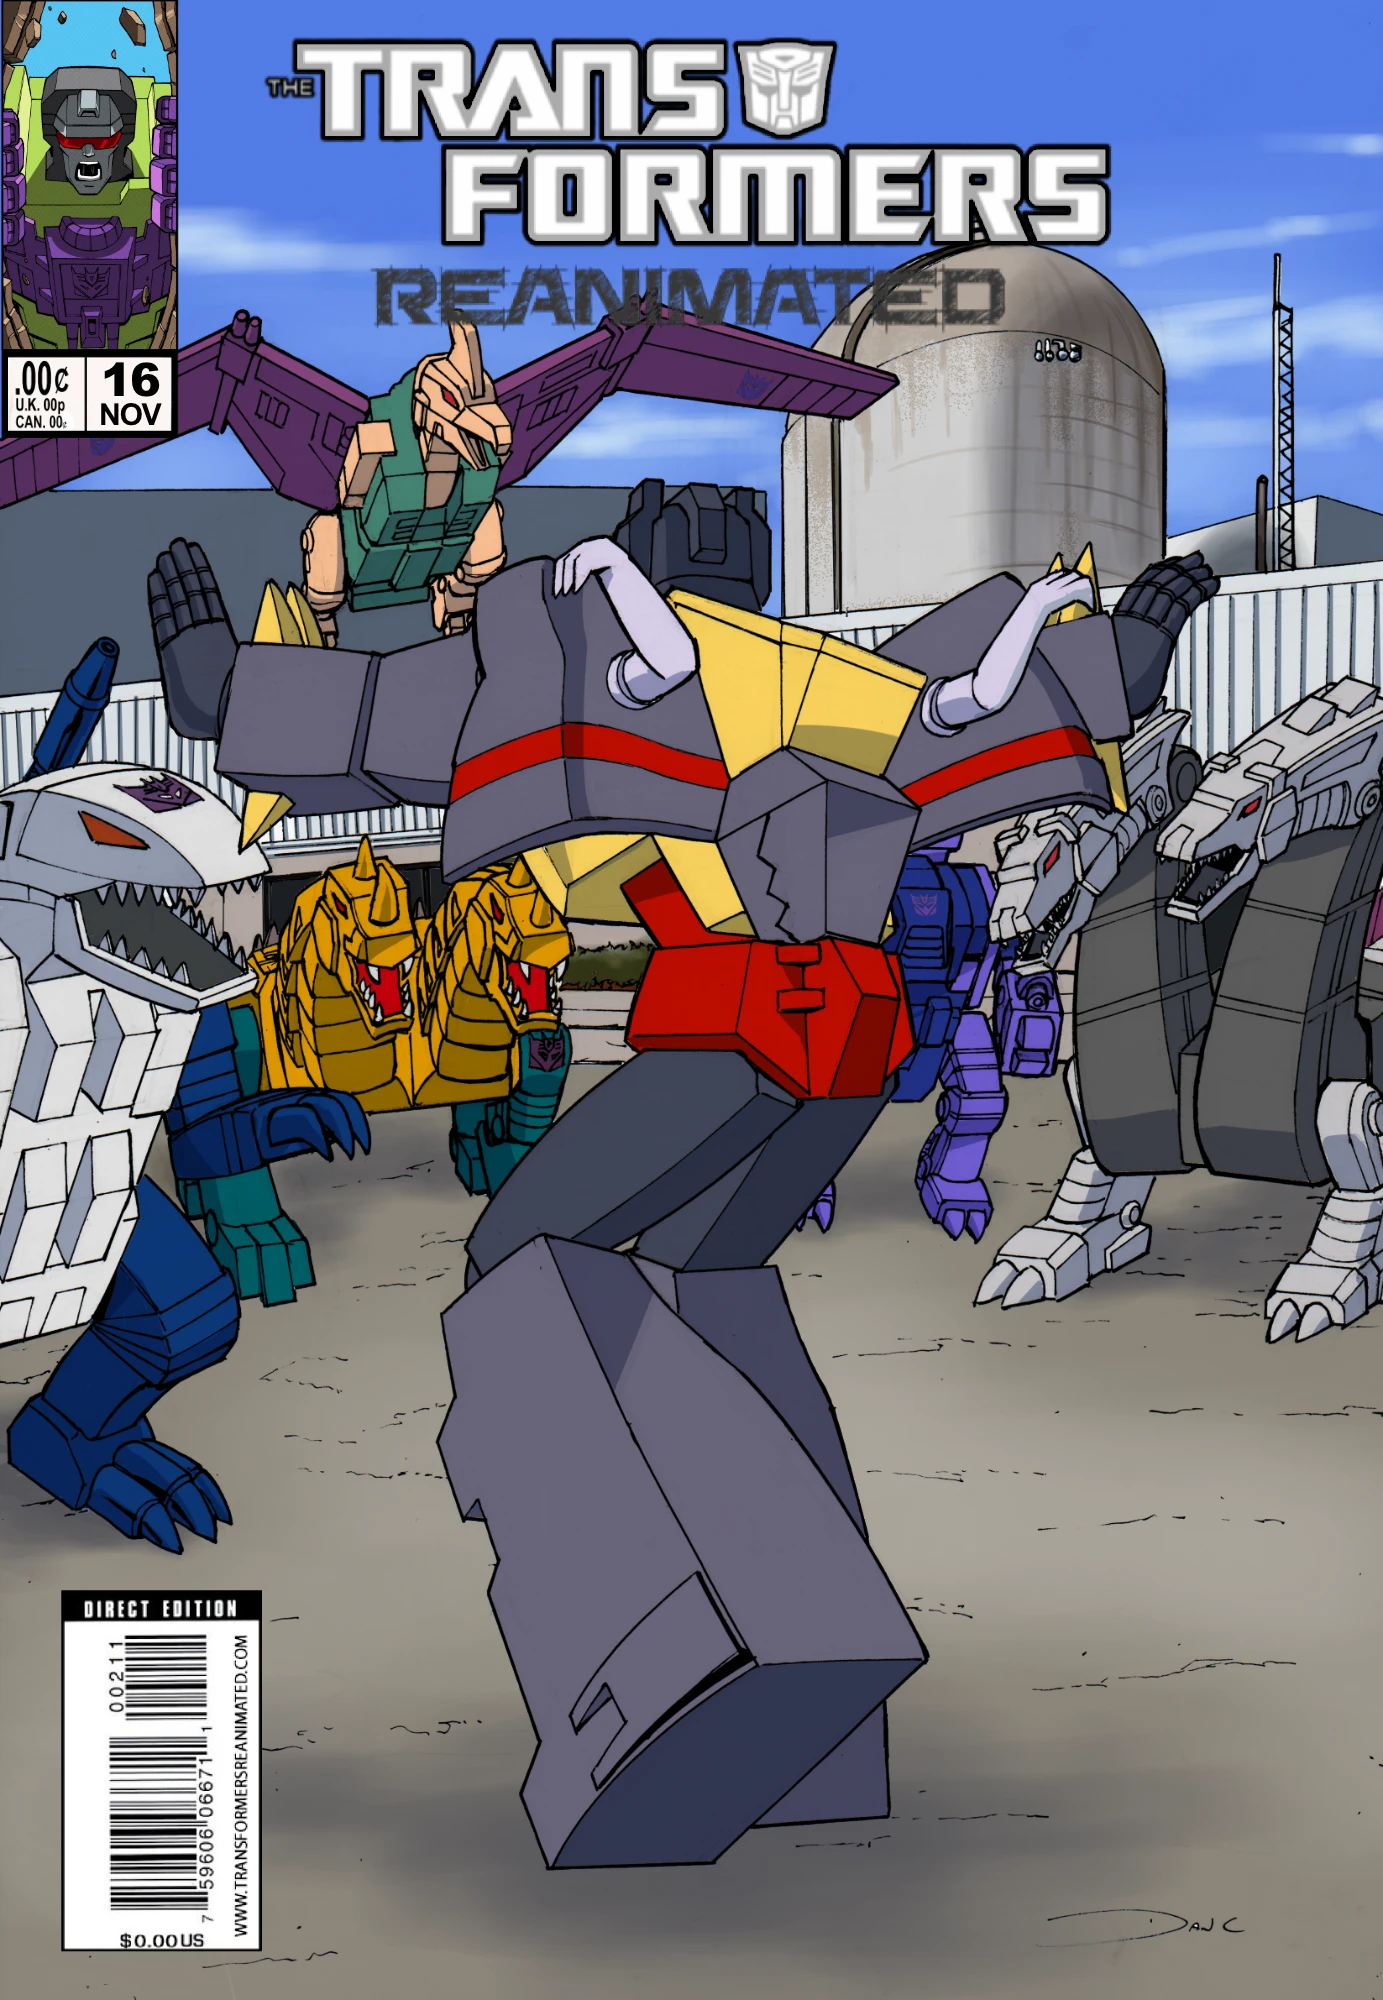 Transformers comic cover with Grimlock holding back the Terrorcons